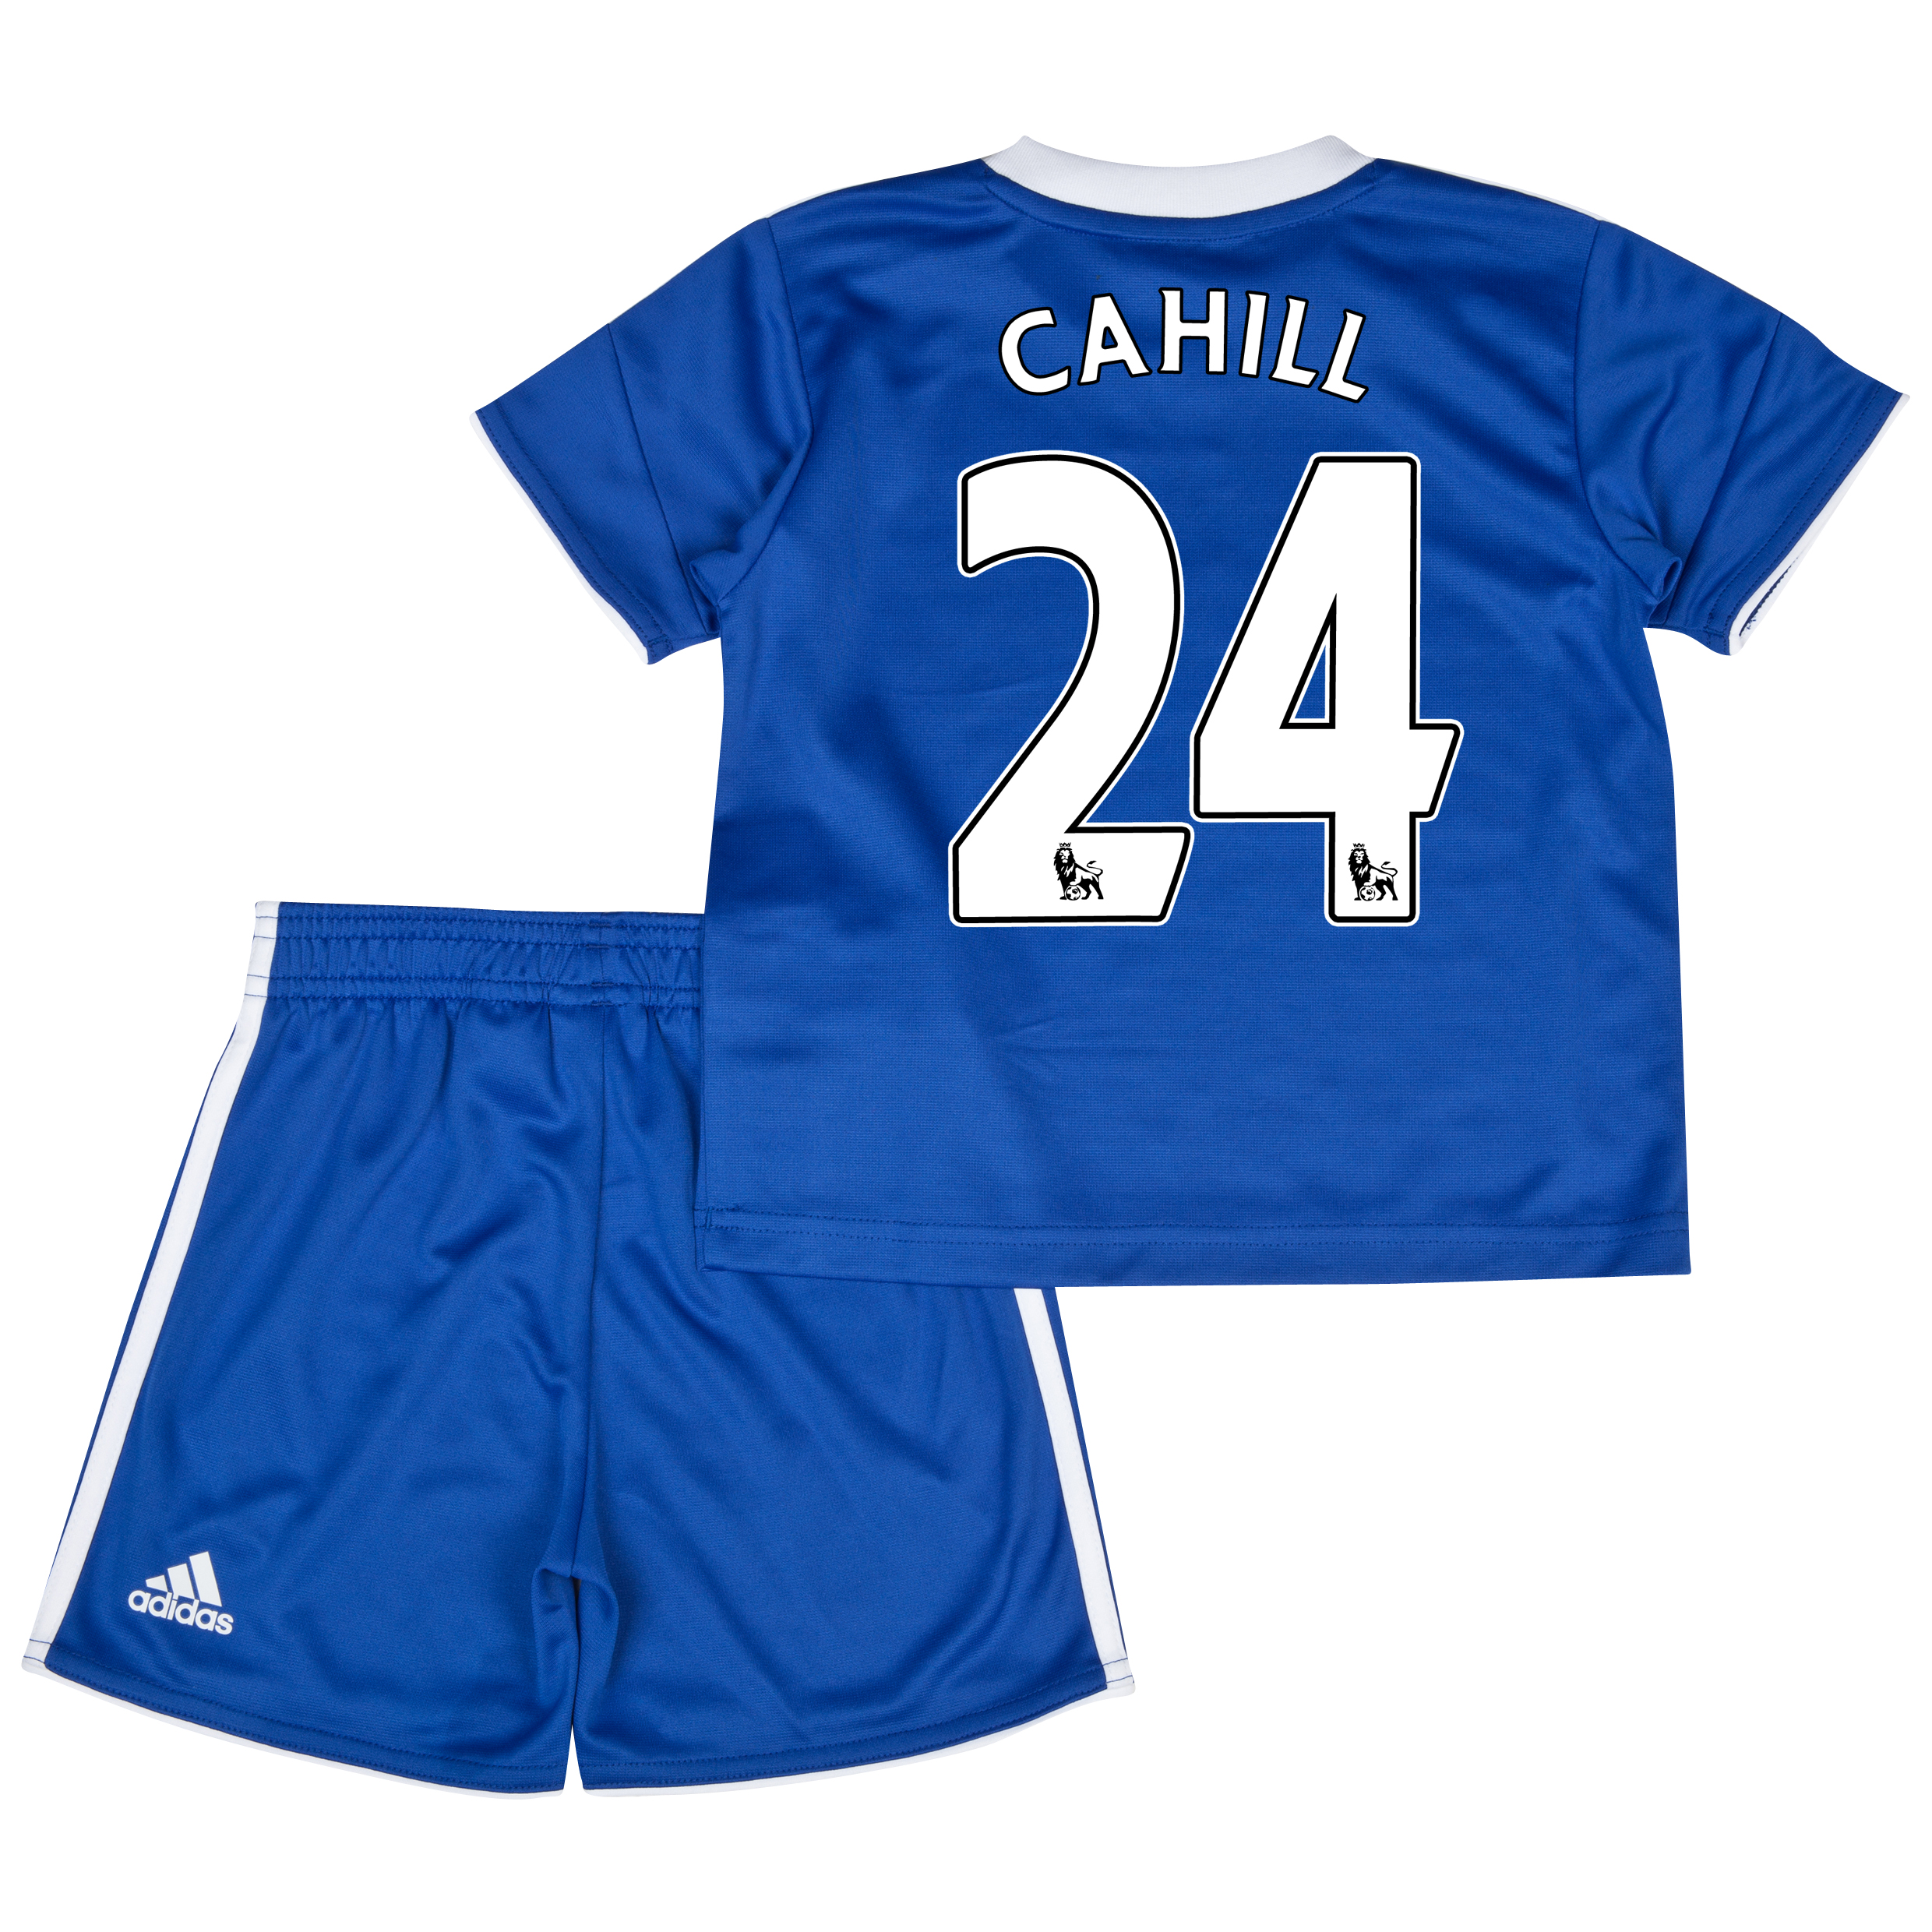 Chelsea Home Mini Kit 2013/14 with Cahill 24 printing